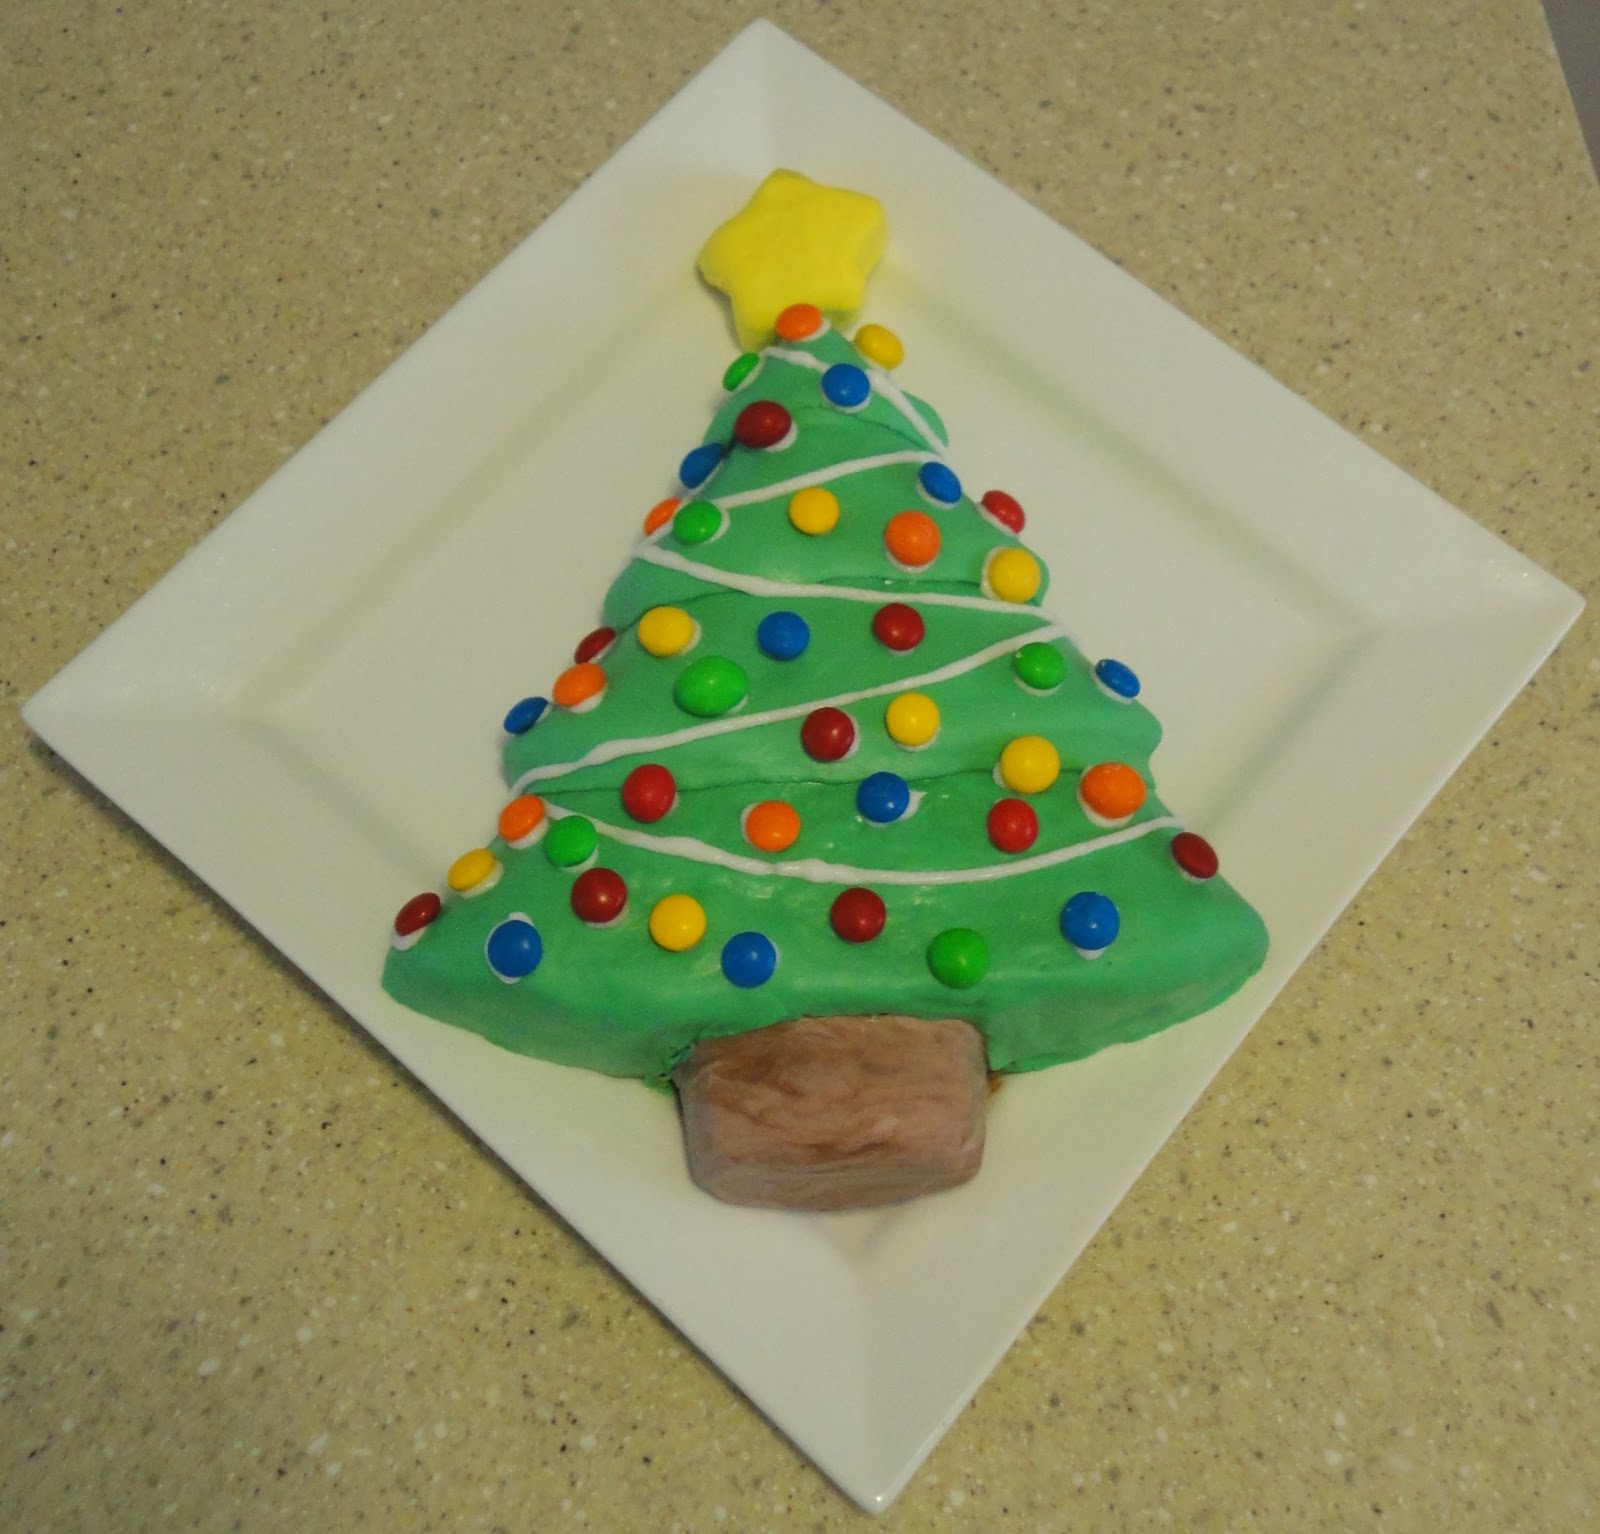 Mrs Pink's Delectable Desserts Christmas Tree Cake